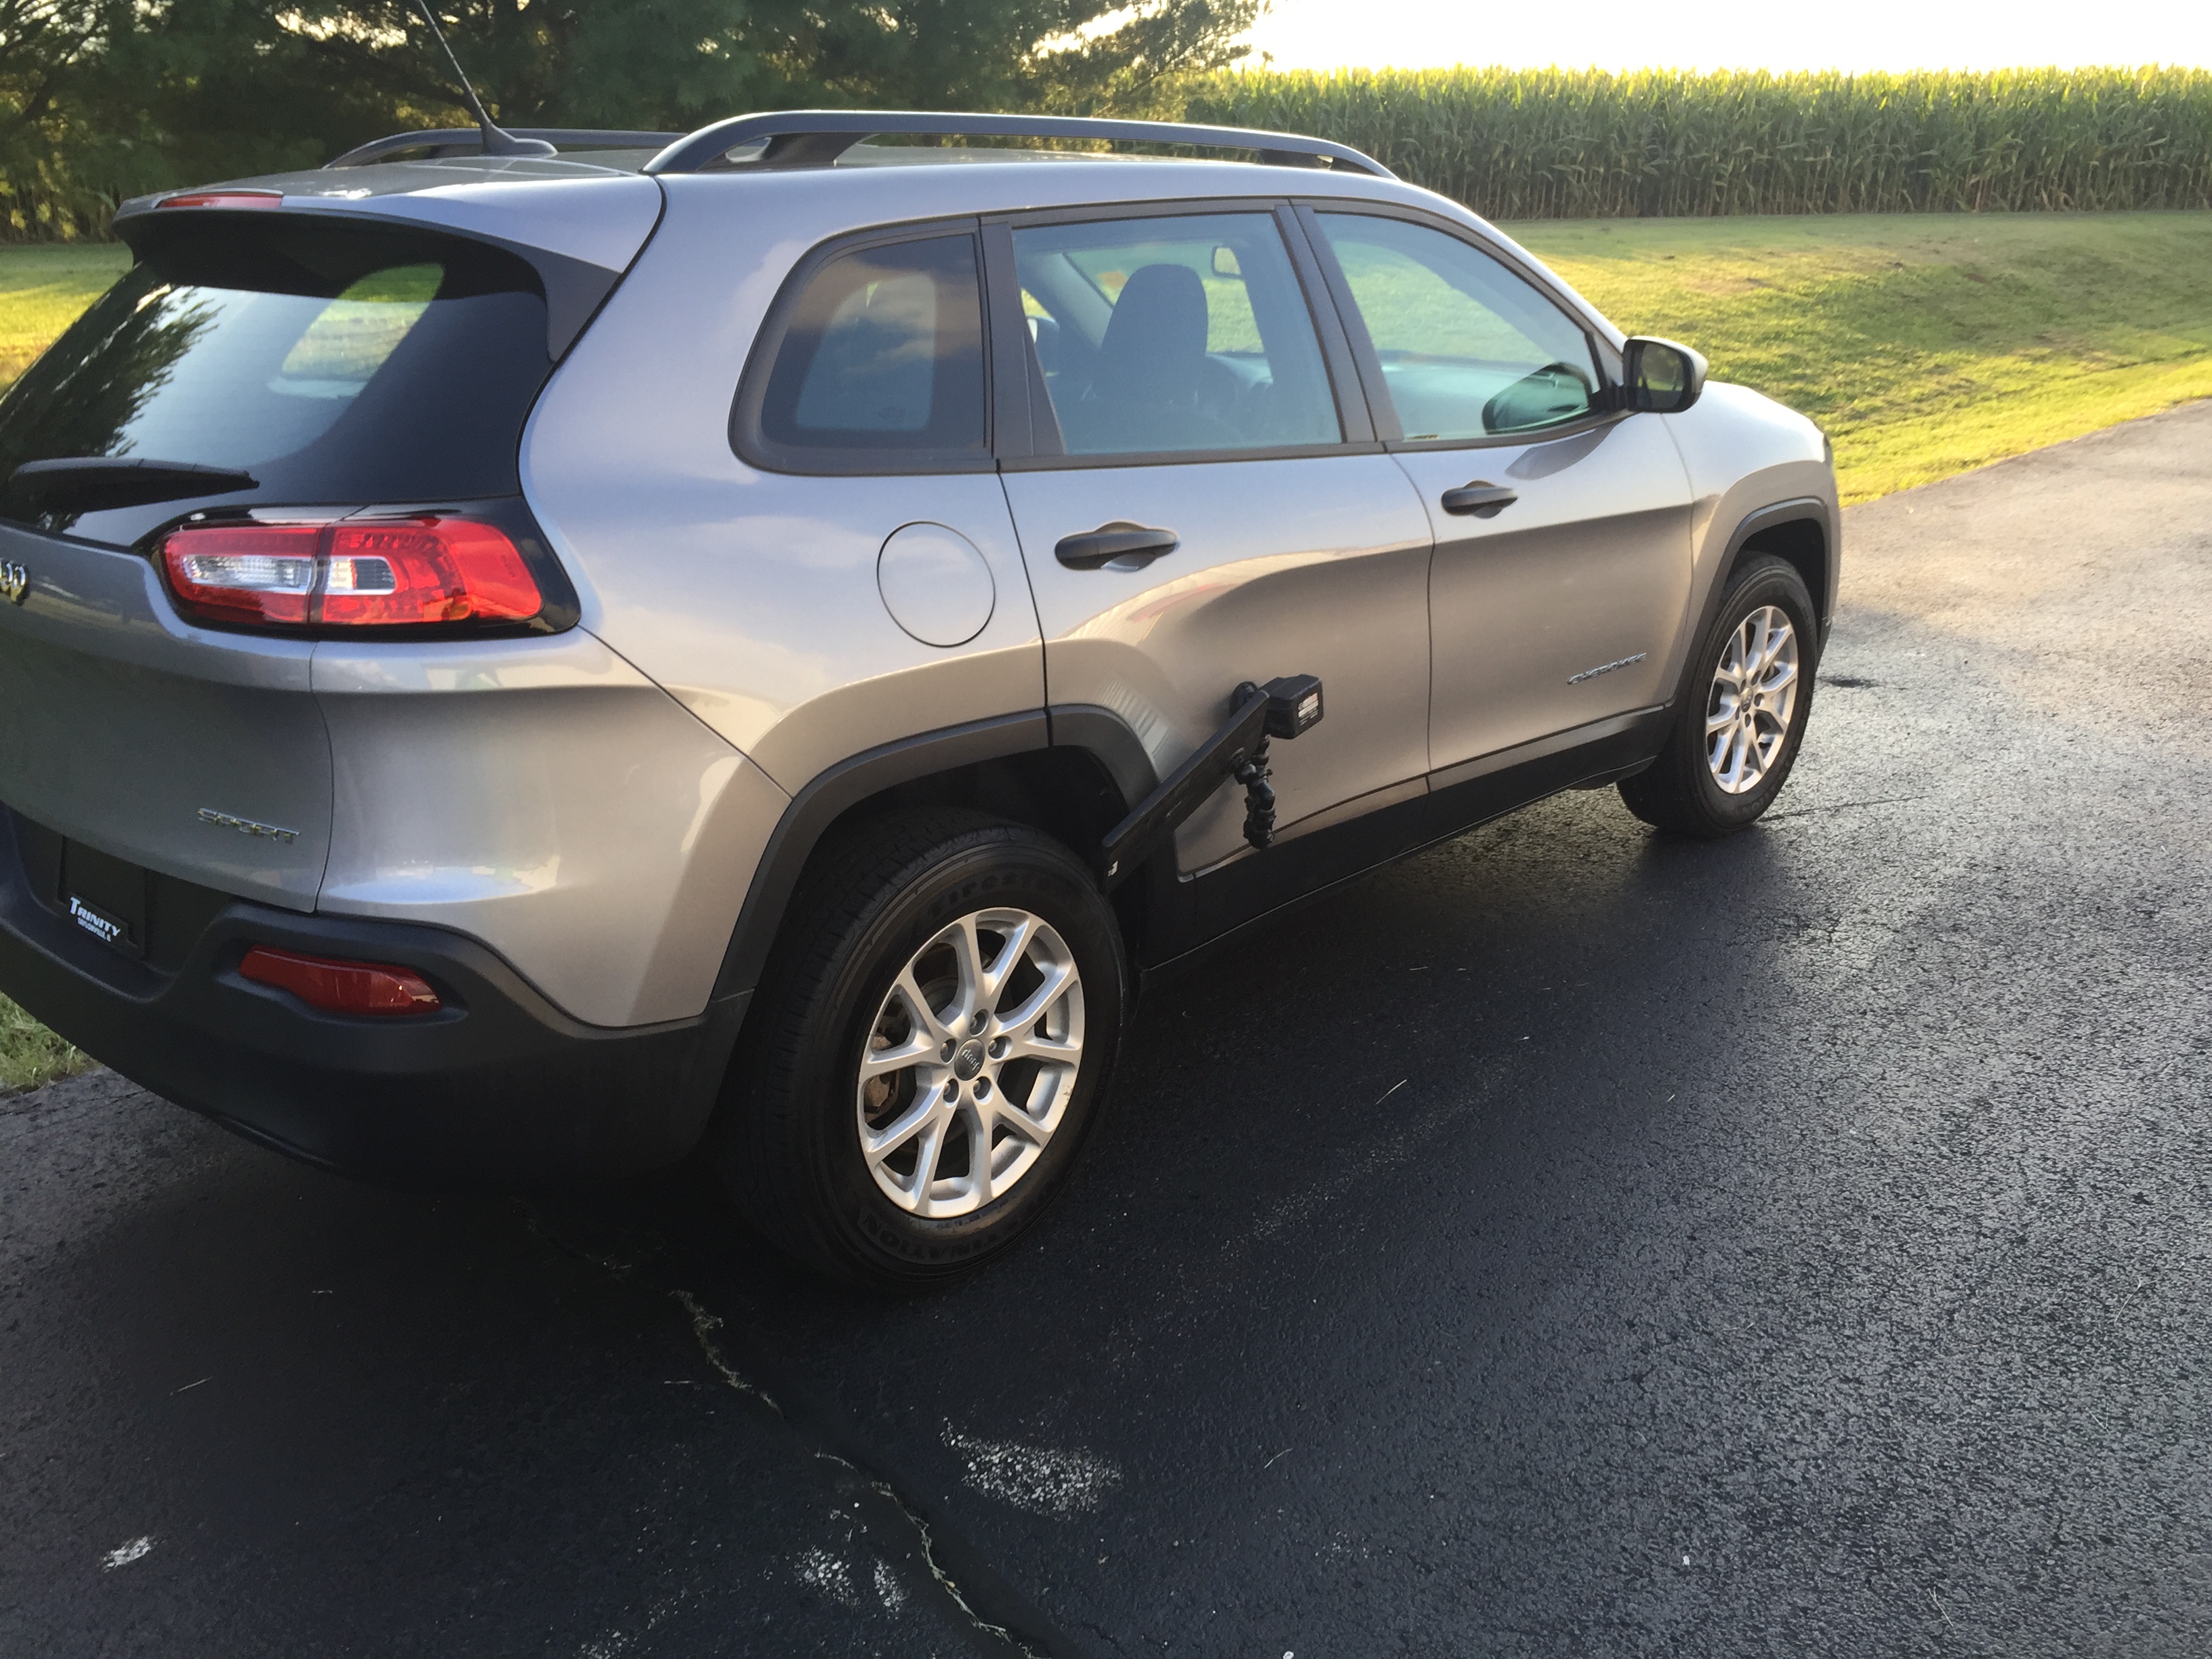 2016 Jeep Cherokee Dent Removal, Springfield, IL http://217dent.com